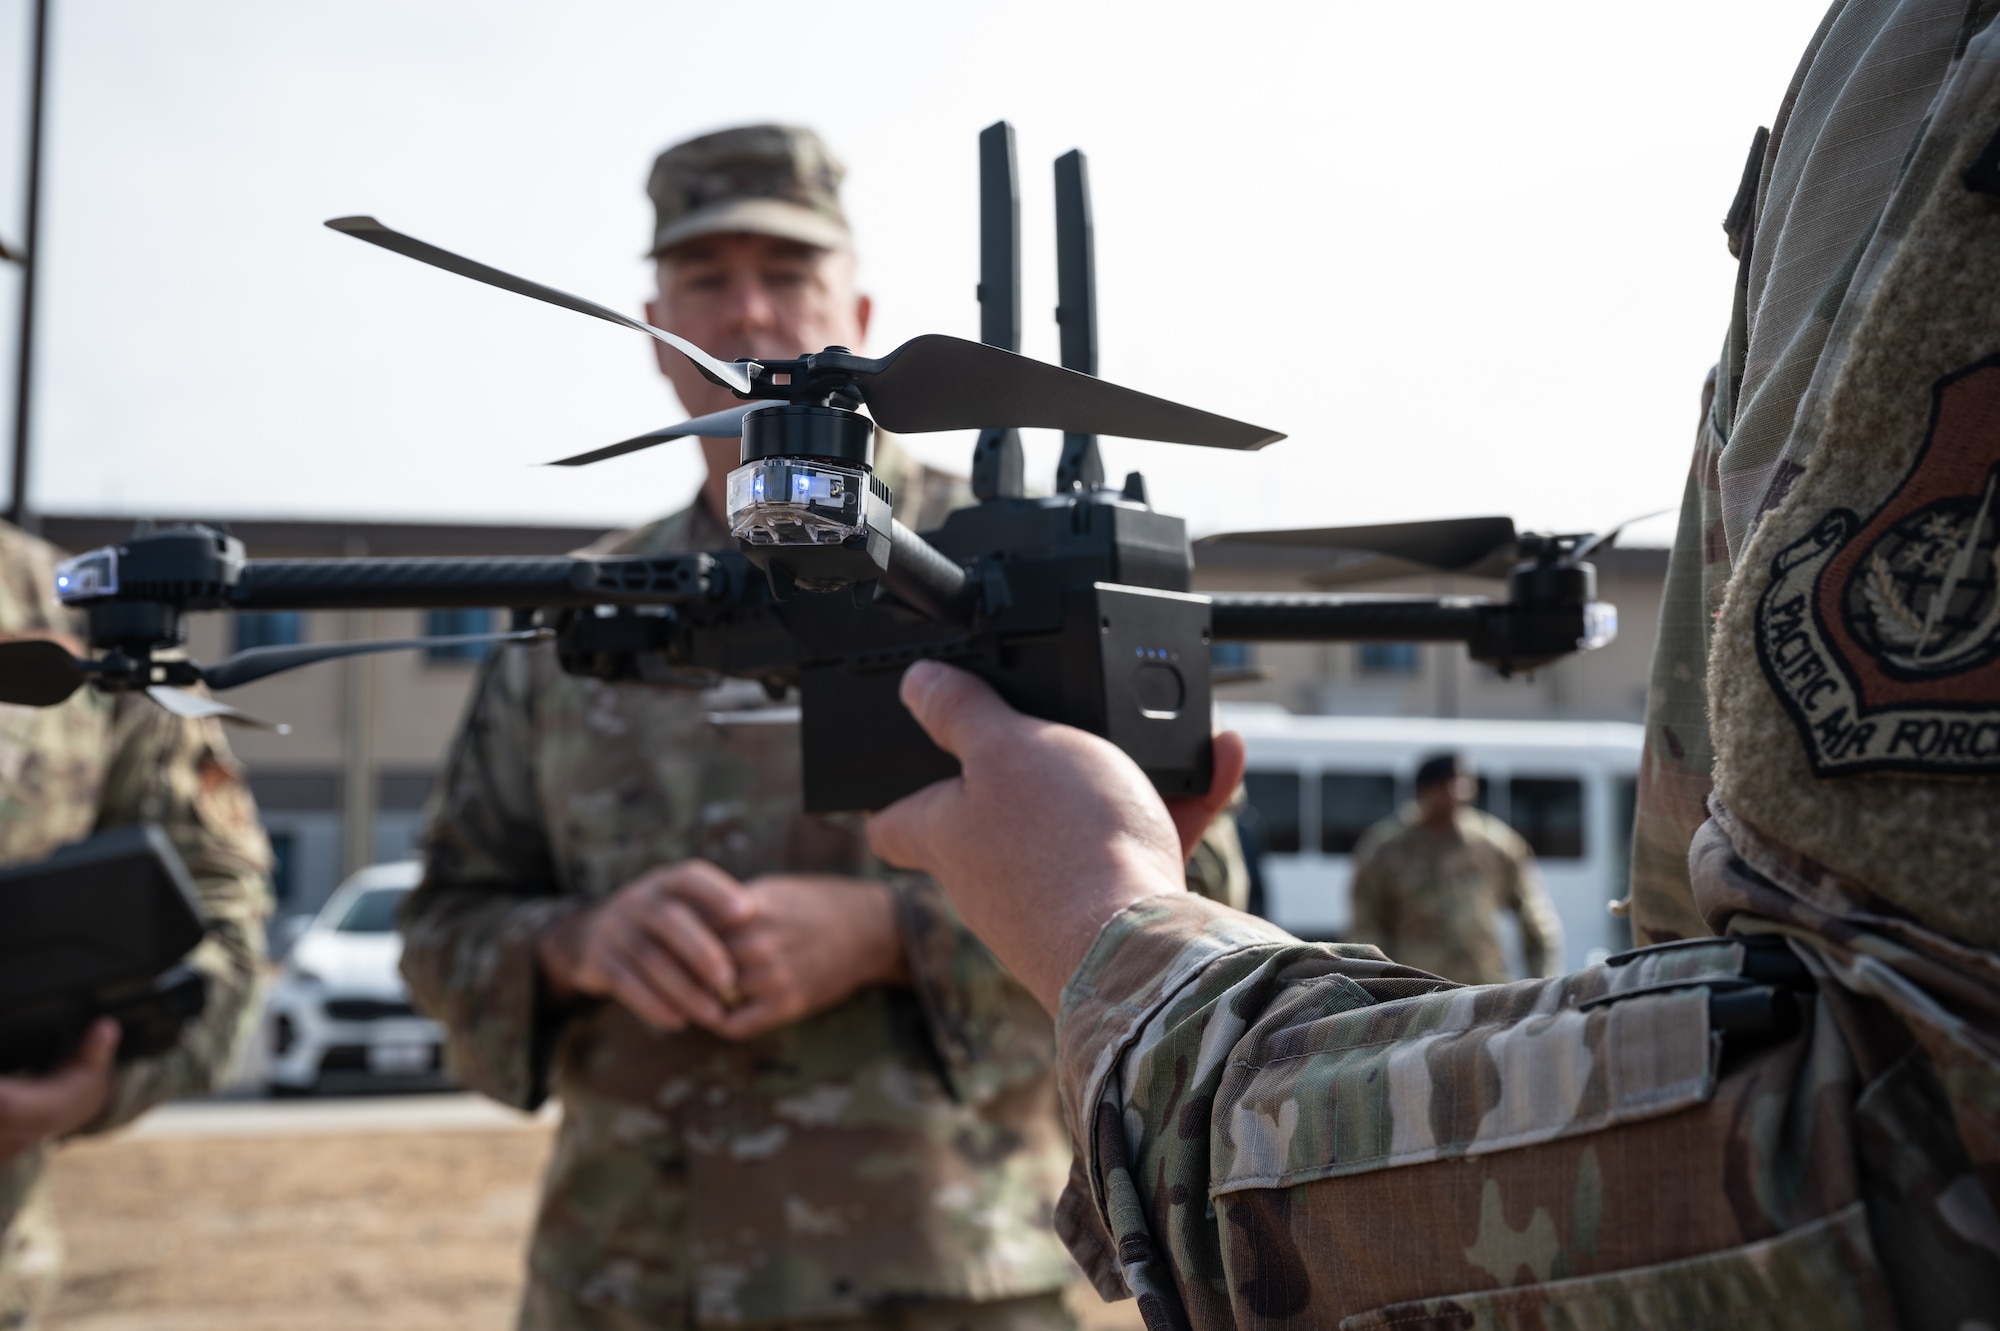 An 8th Security Forces Squadron defender holds up a small, unmanned aircraft system during Col. Patrick Miller’s, Pacific Air Forces logistics, engineering and force protection director, visit at Kunsan Air Base, Republic of Korea, Feb. 28, 2023. Miller received a capabilities demonstration to explain the benefits of investing in more sUAS qualified personnel. (U.S. Air Force photo by Staff Sgt. Sadie Colbert)